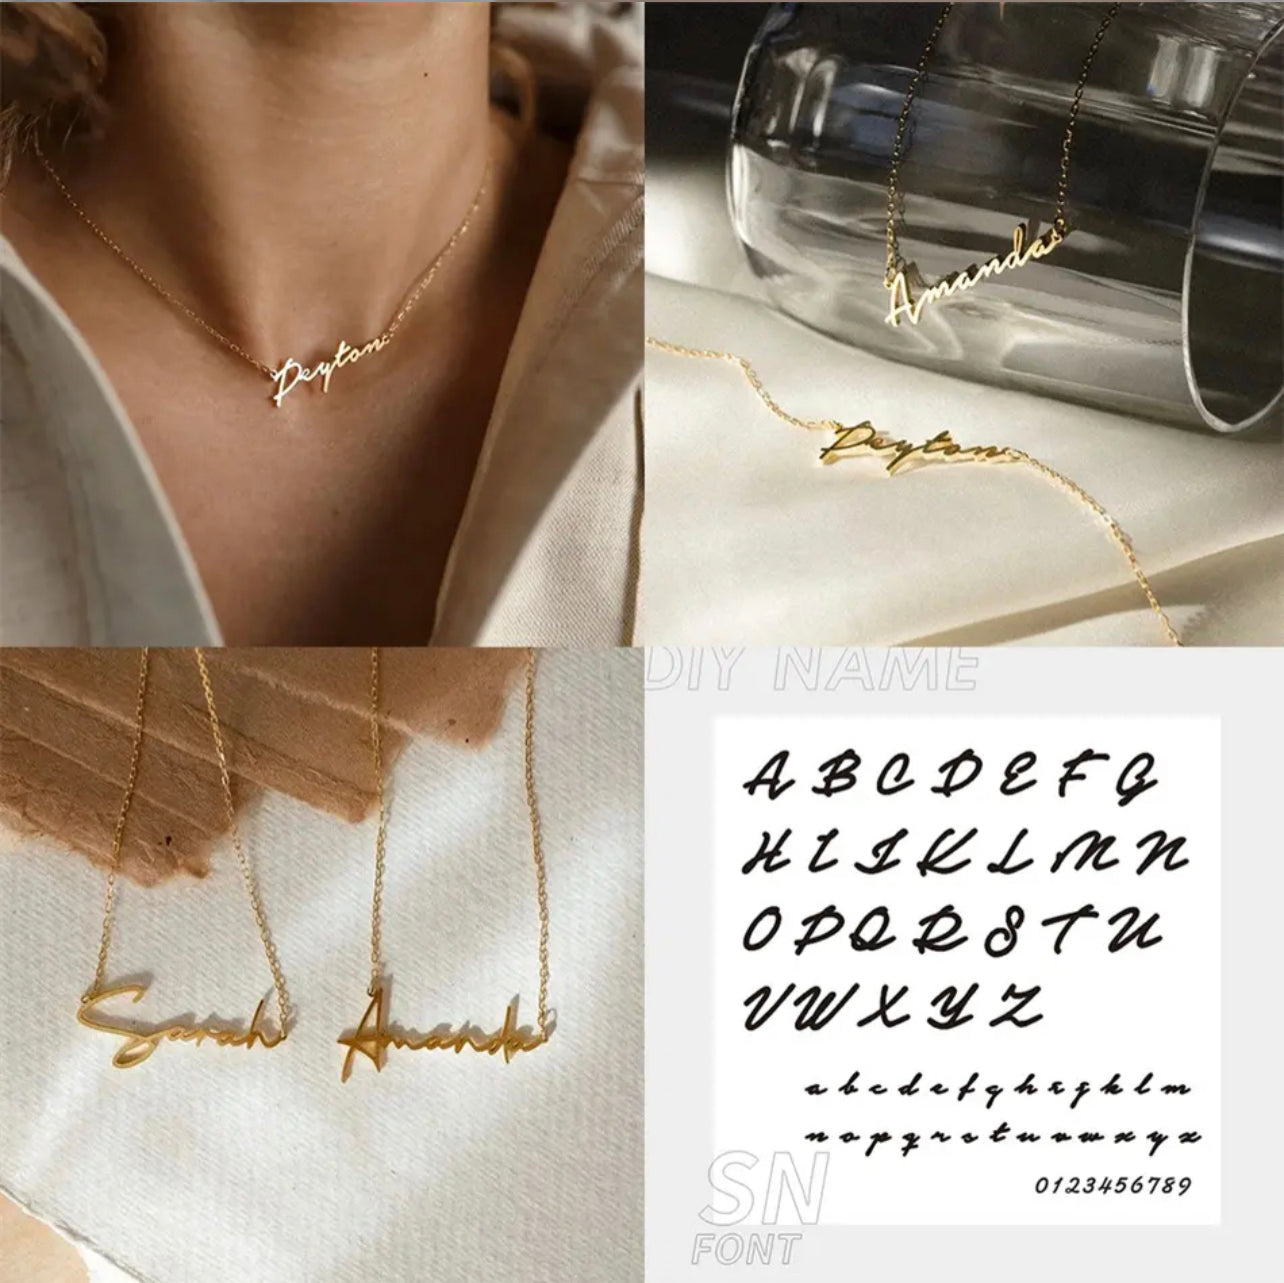 Dainty Cuban Name Necklace